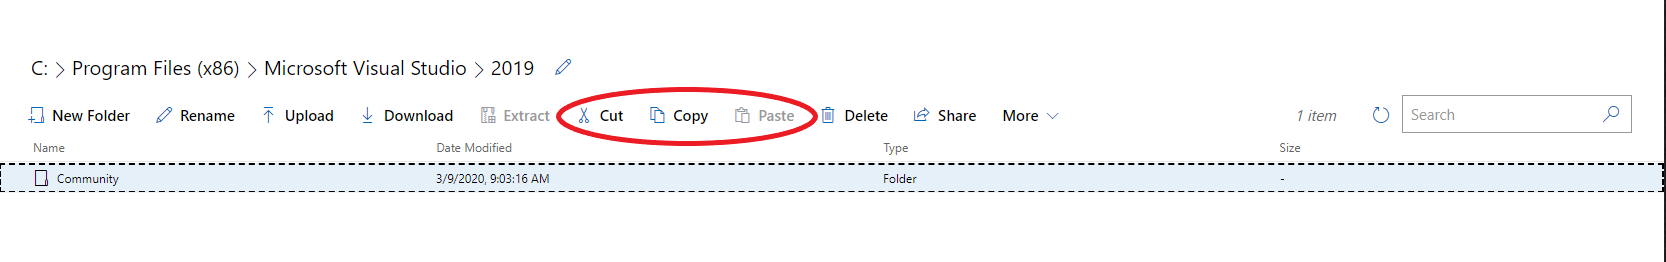 When you select a folder or file in the Files tool, users have the option to cut or copy the file or folder. 